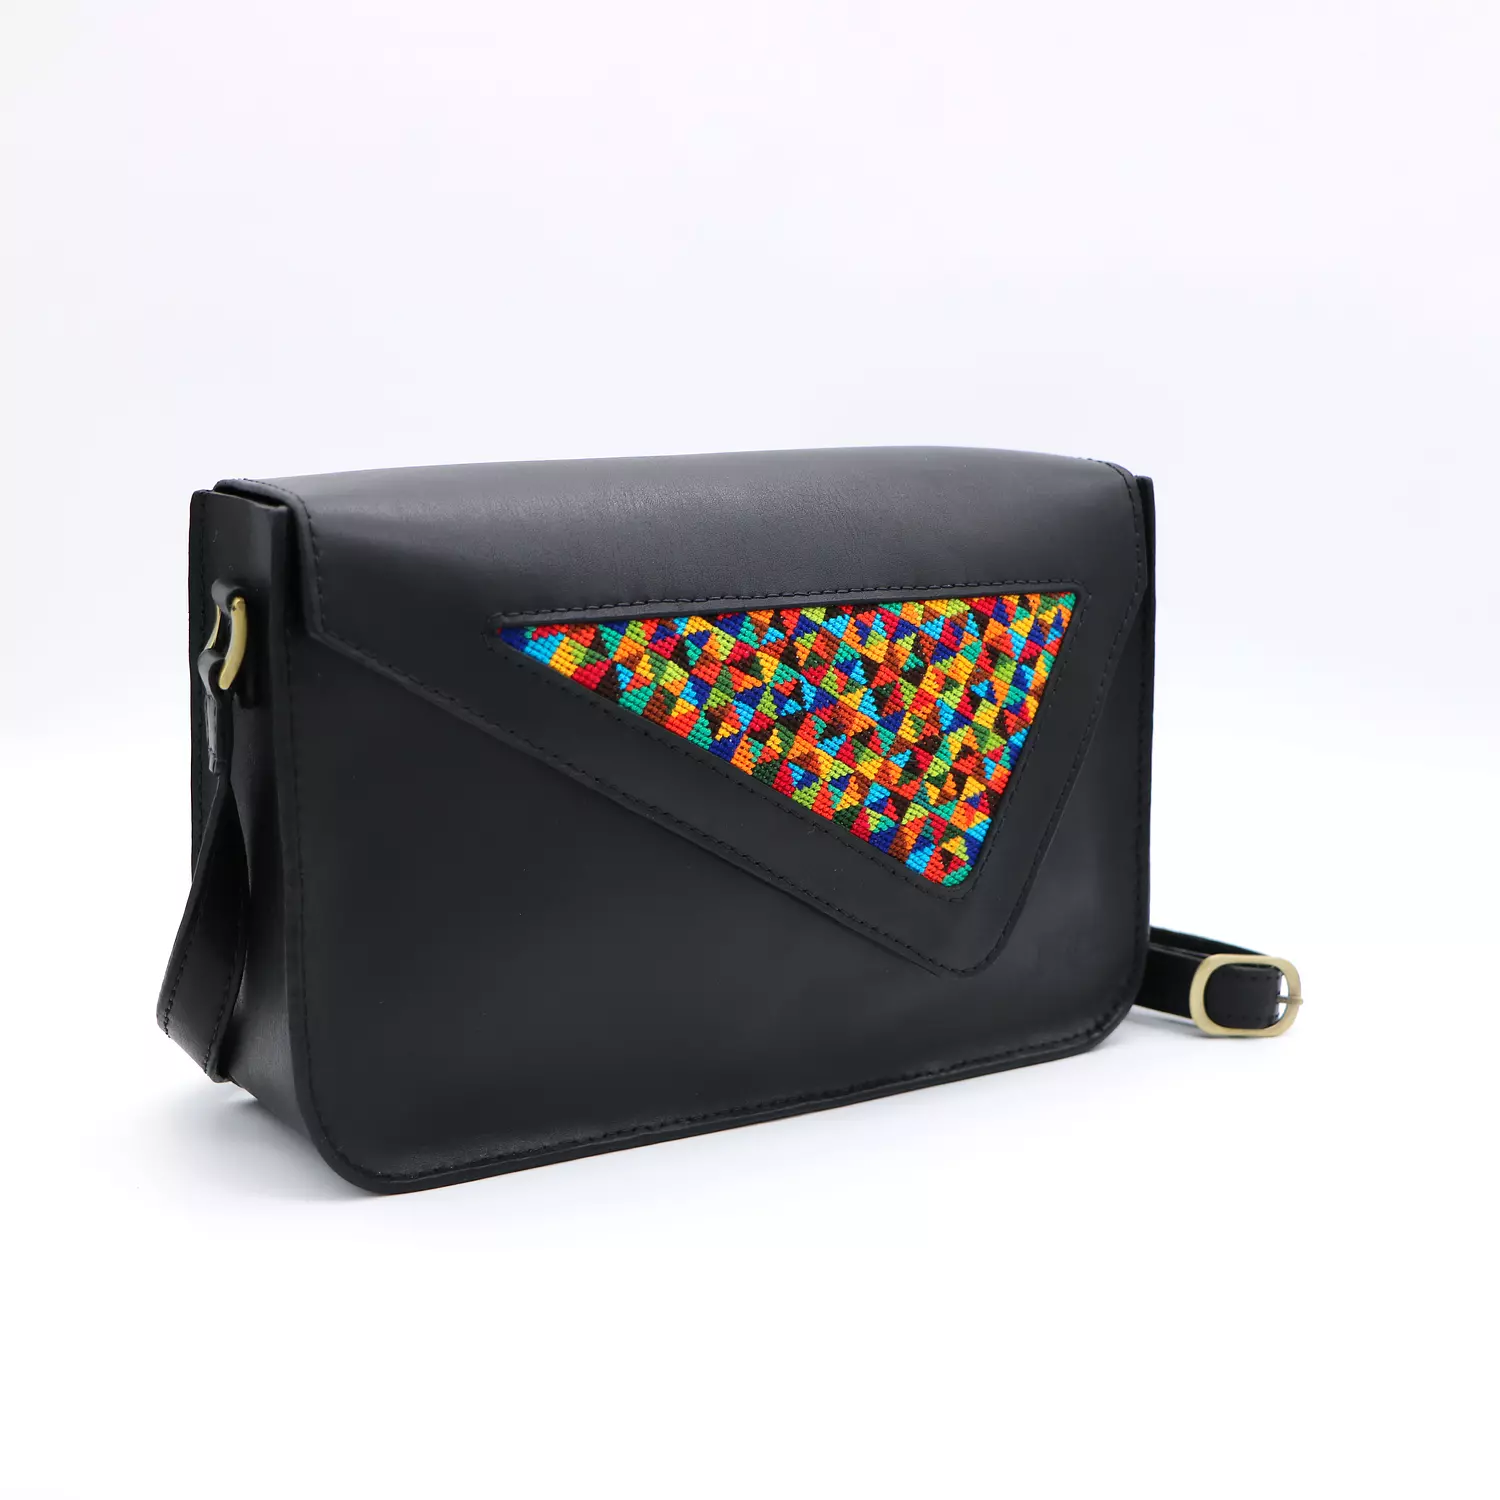 Genuine leather bag with colorful cross-stitching. 0